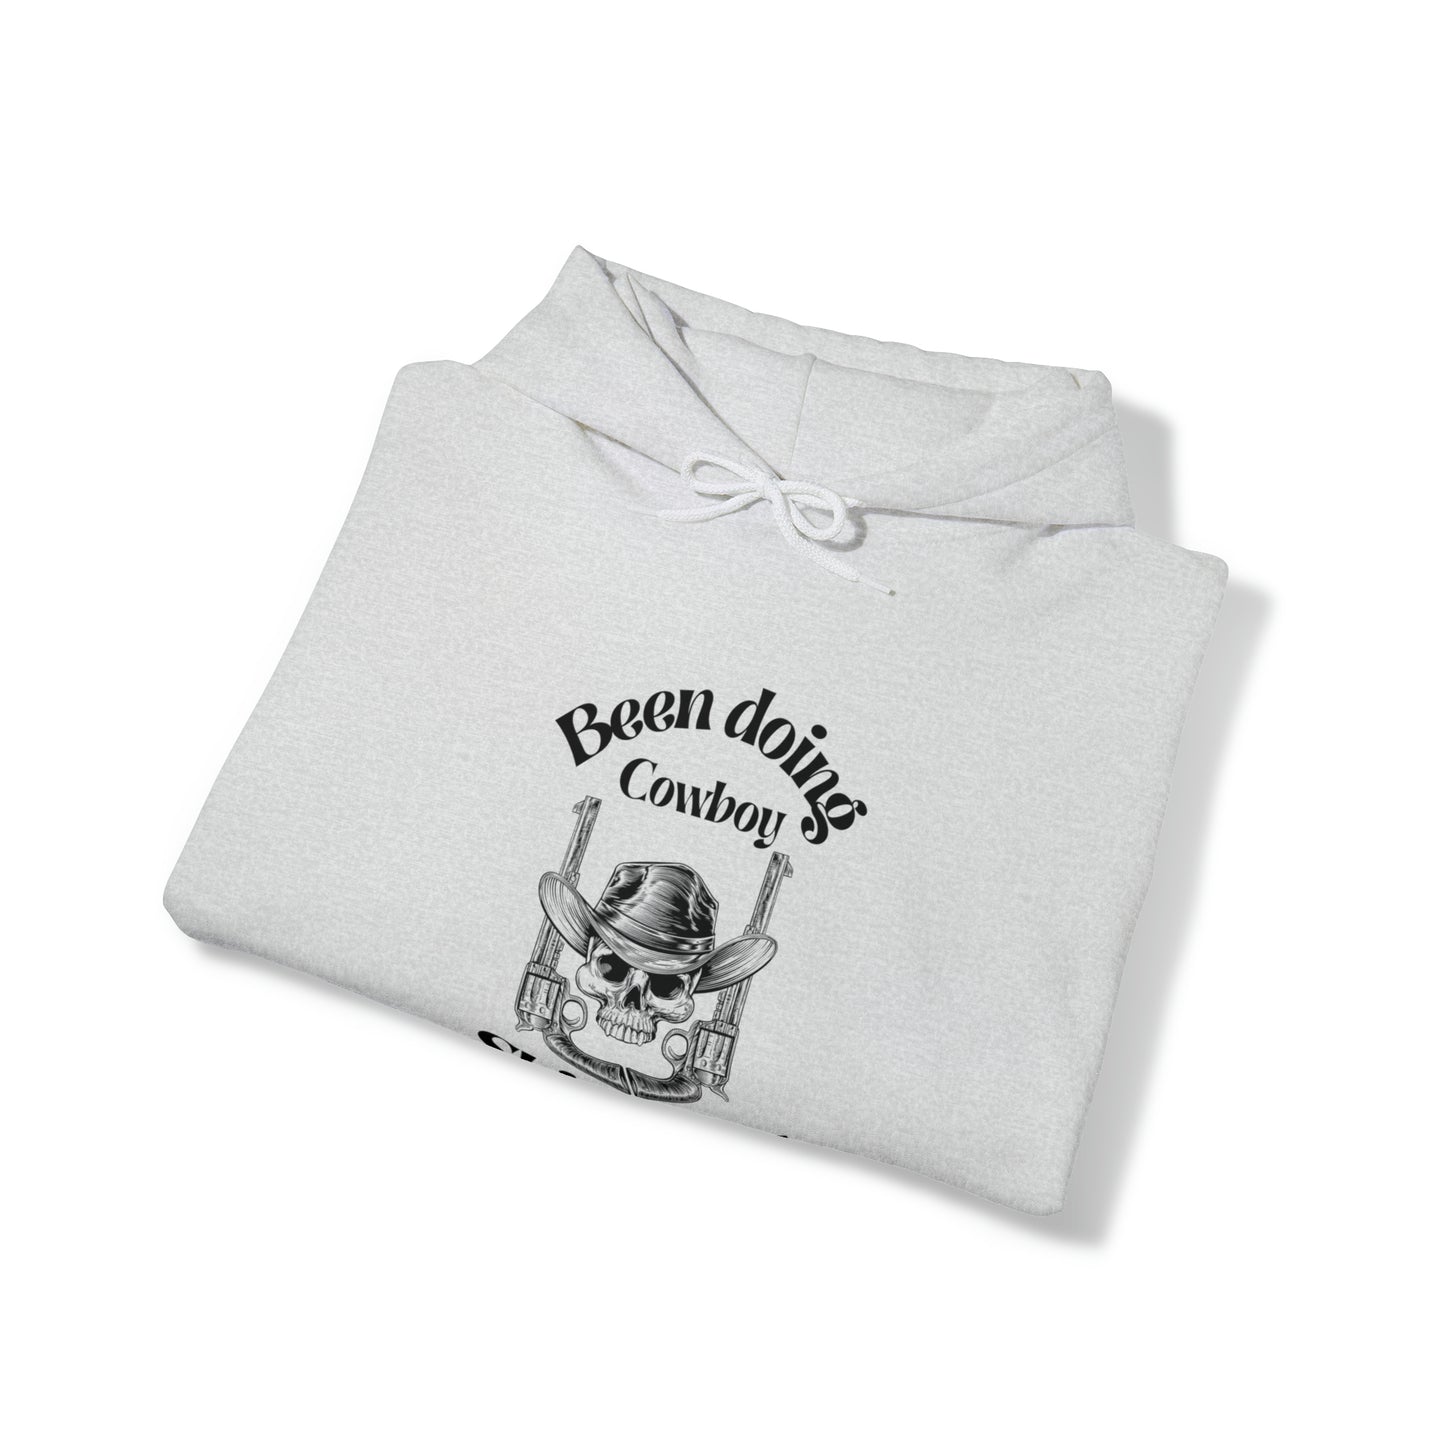 Been doing Cowboy Shit all day Hoodie